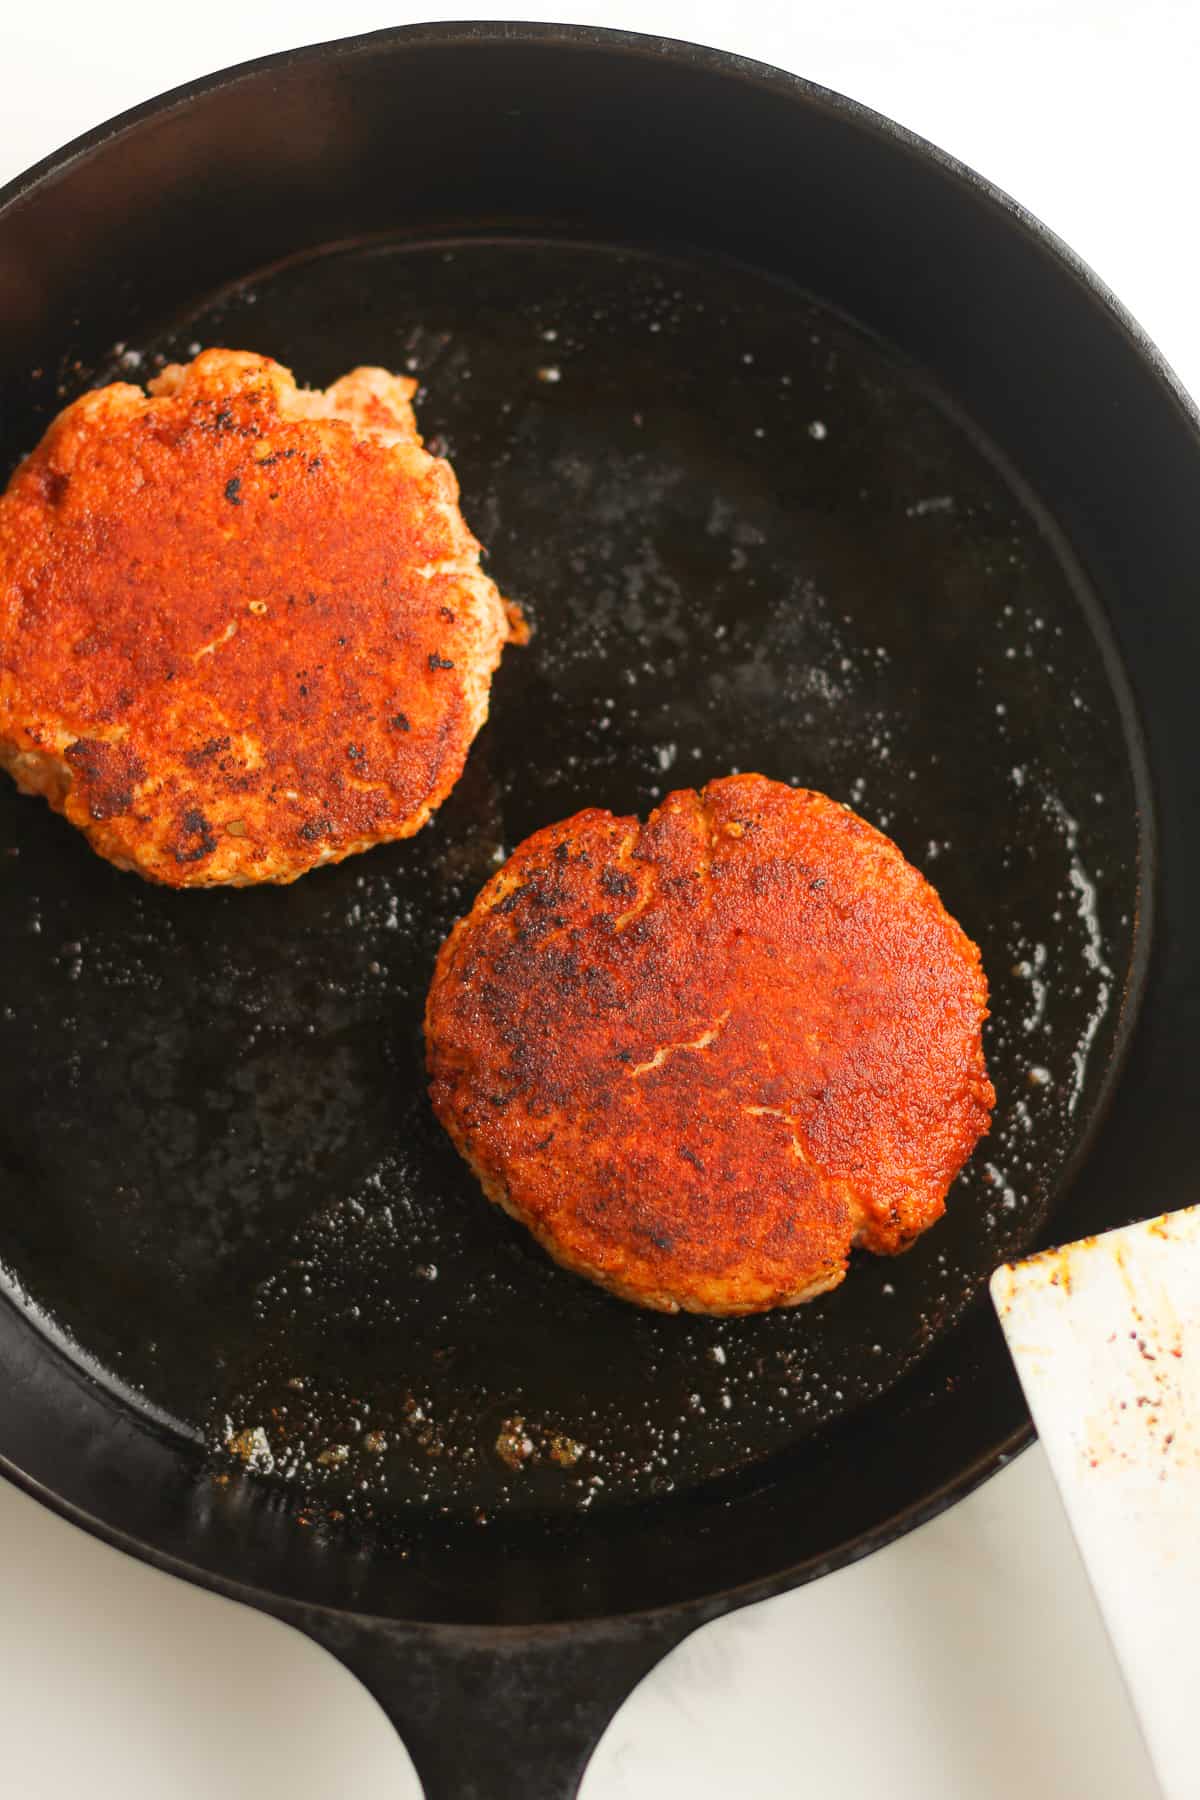 A cast iron skillet with two large salmon burgers cooking.